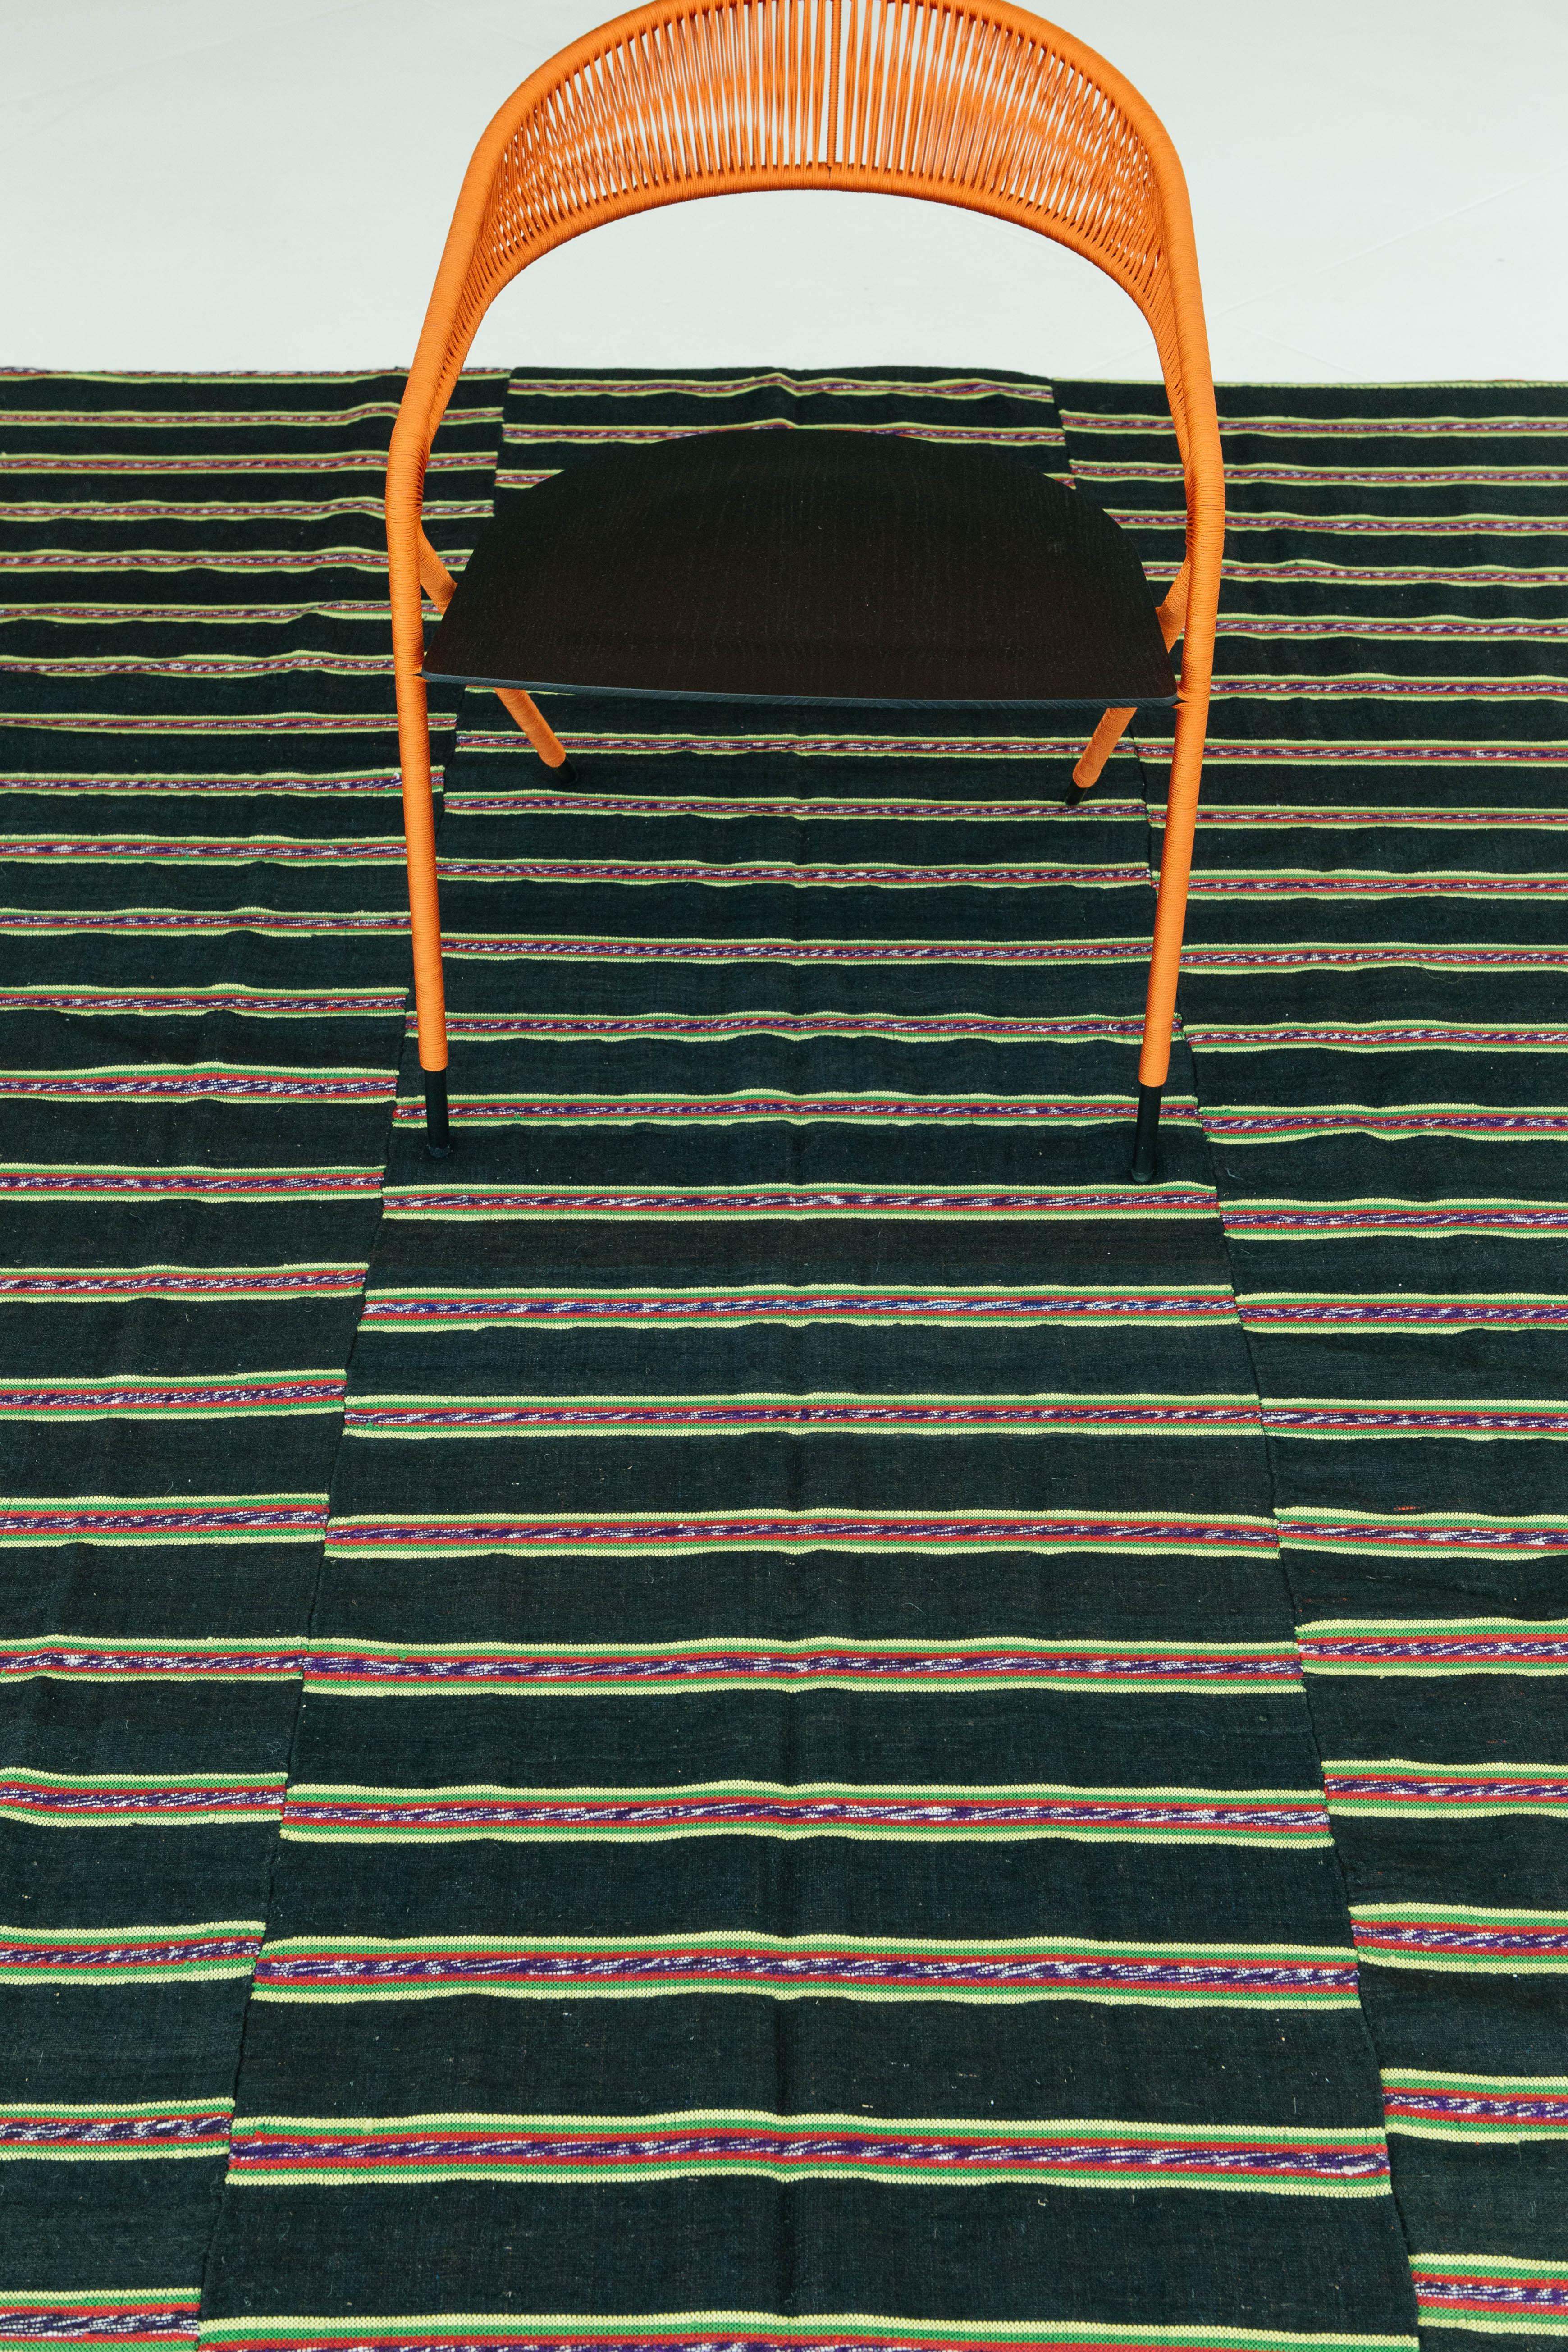 A Turkish Tisse Kilim flat-weave rug with a dark chocolate field and bands of colorful tribal stripes. This Kilim has a triple vertical banding design as well as multicolored tribal horizontal stripes. This rug adds dimension and character to any